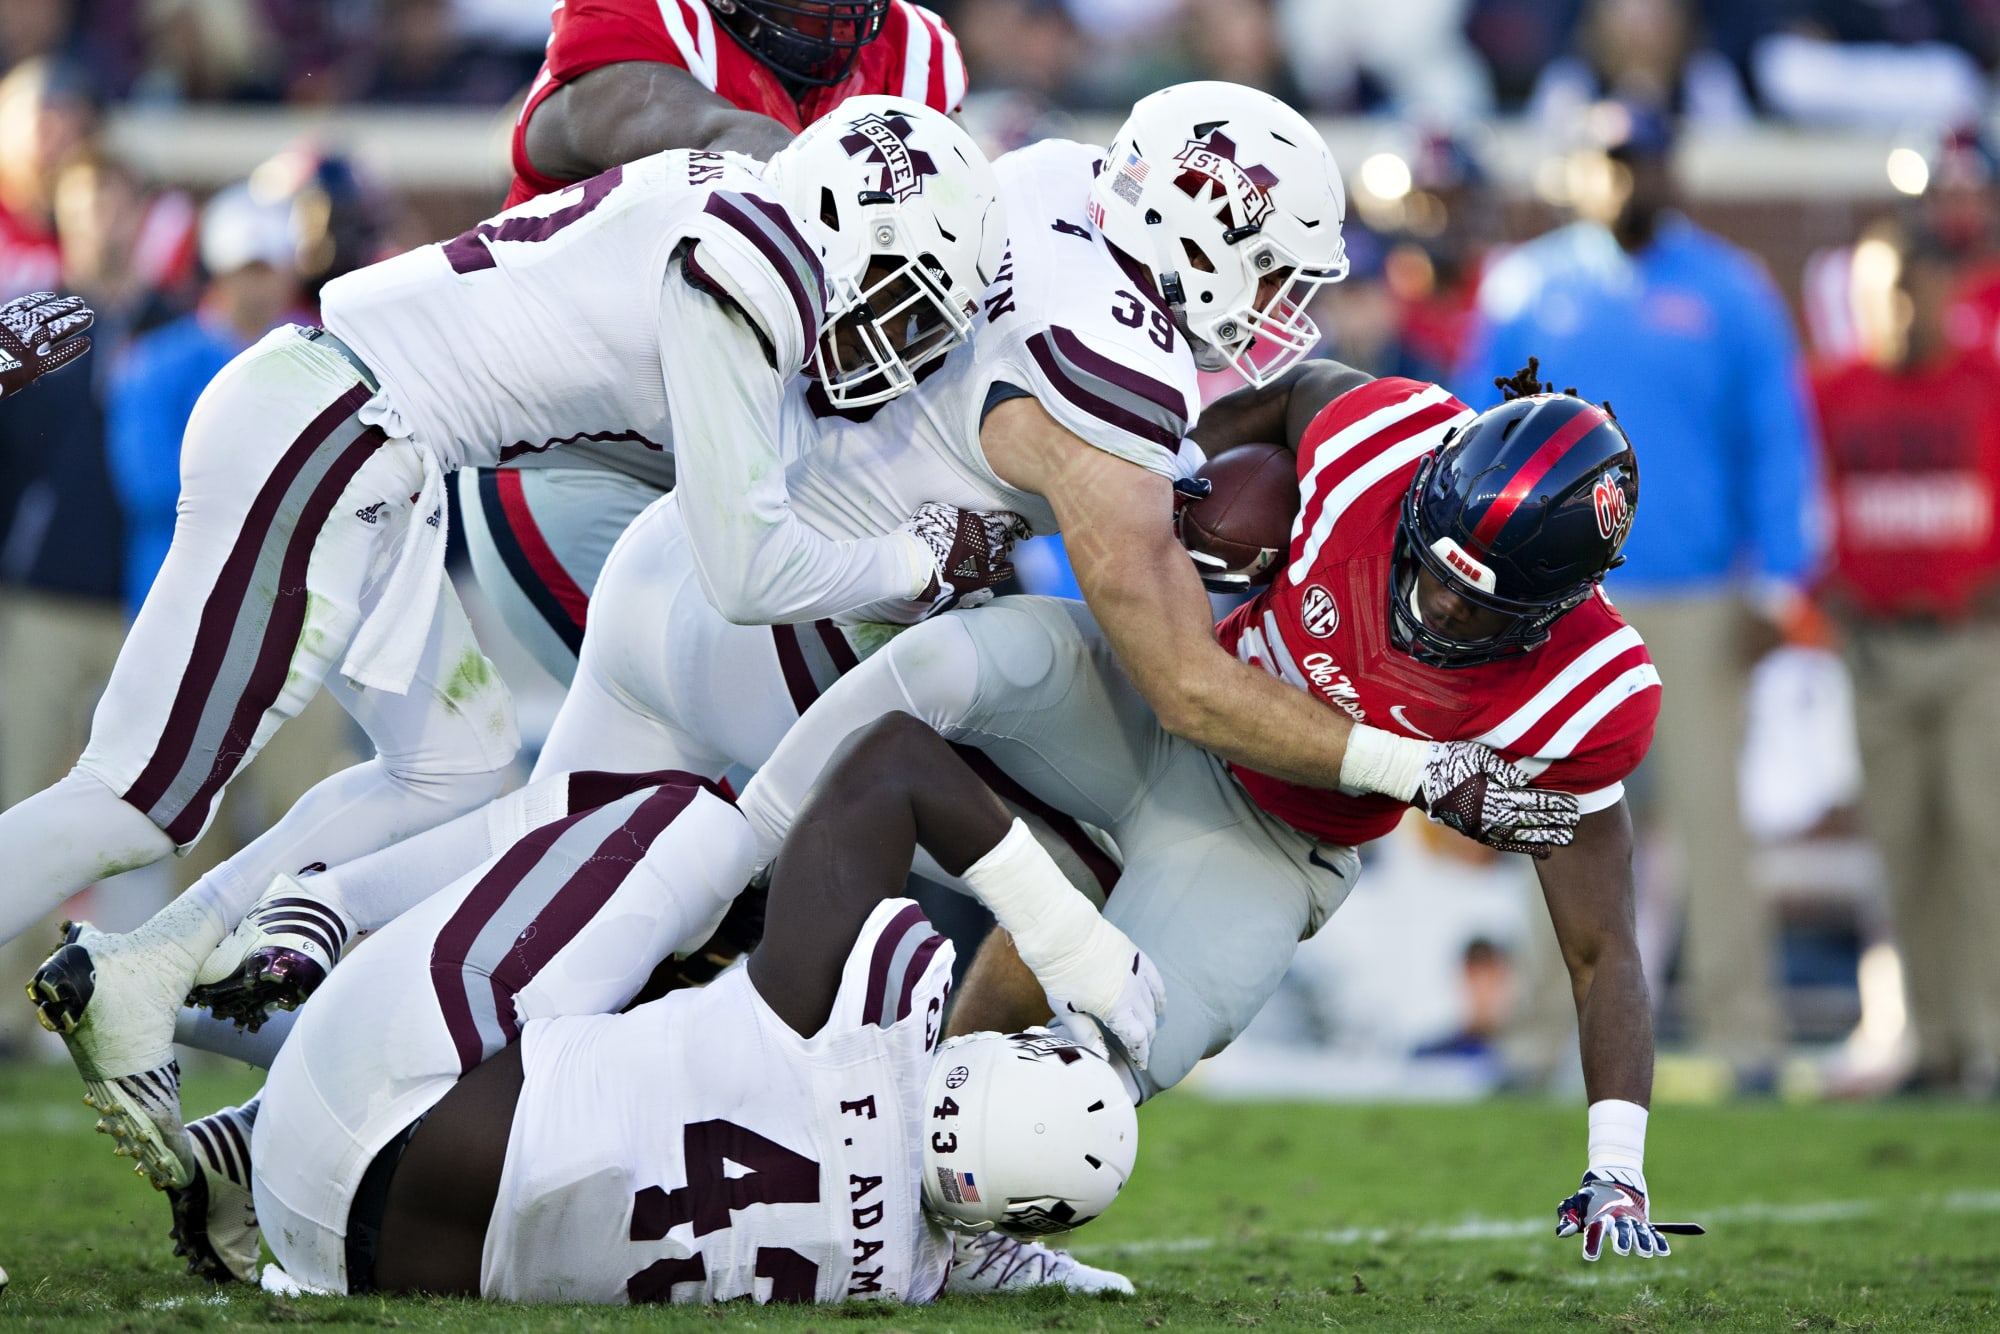 Mississippi State Football: Bulldogs force Louisiana Tech into 3rd & 93